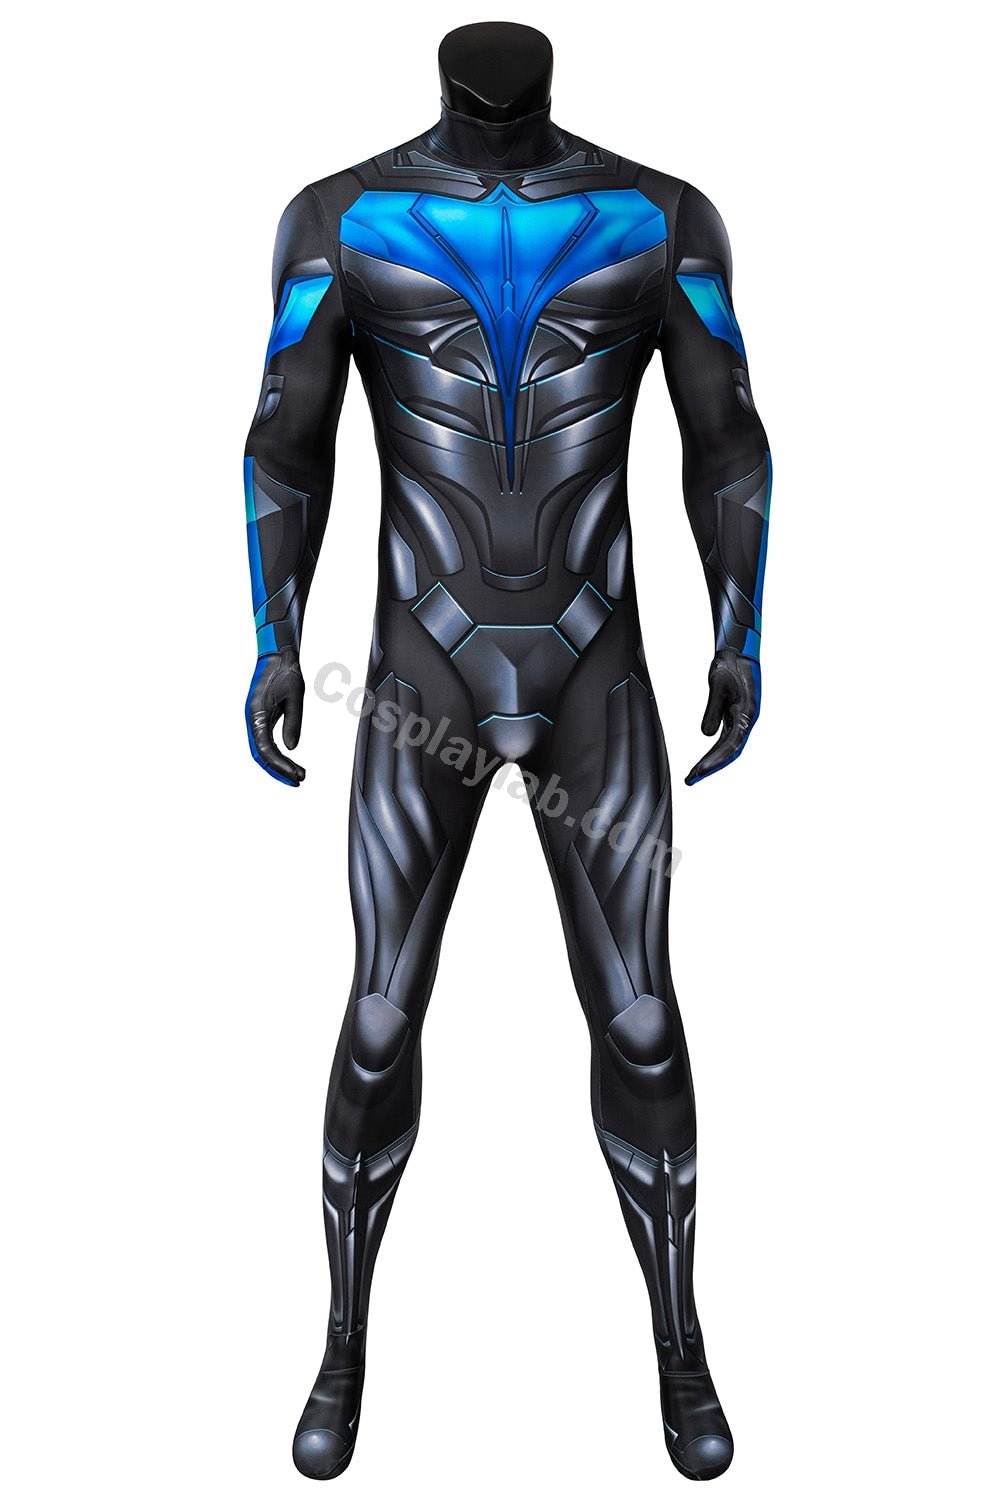 Titans Nightwing Cosplay Costume Dick Grayson 3D Printed Spandex Cosplay Suit Jumpsuit By CosplayLab